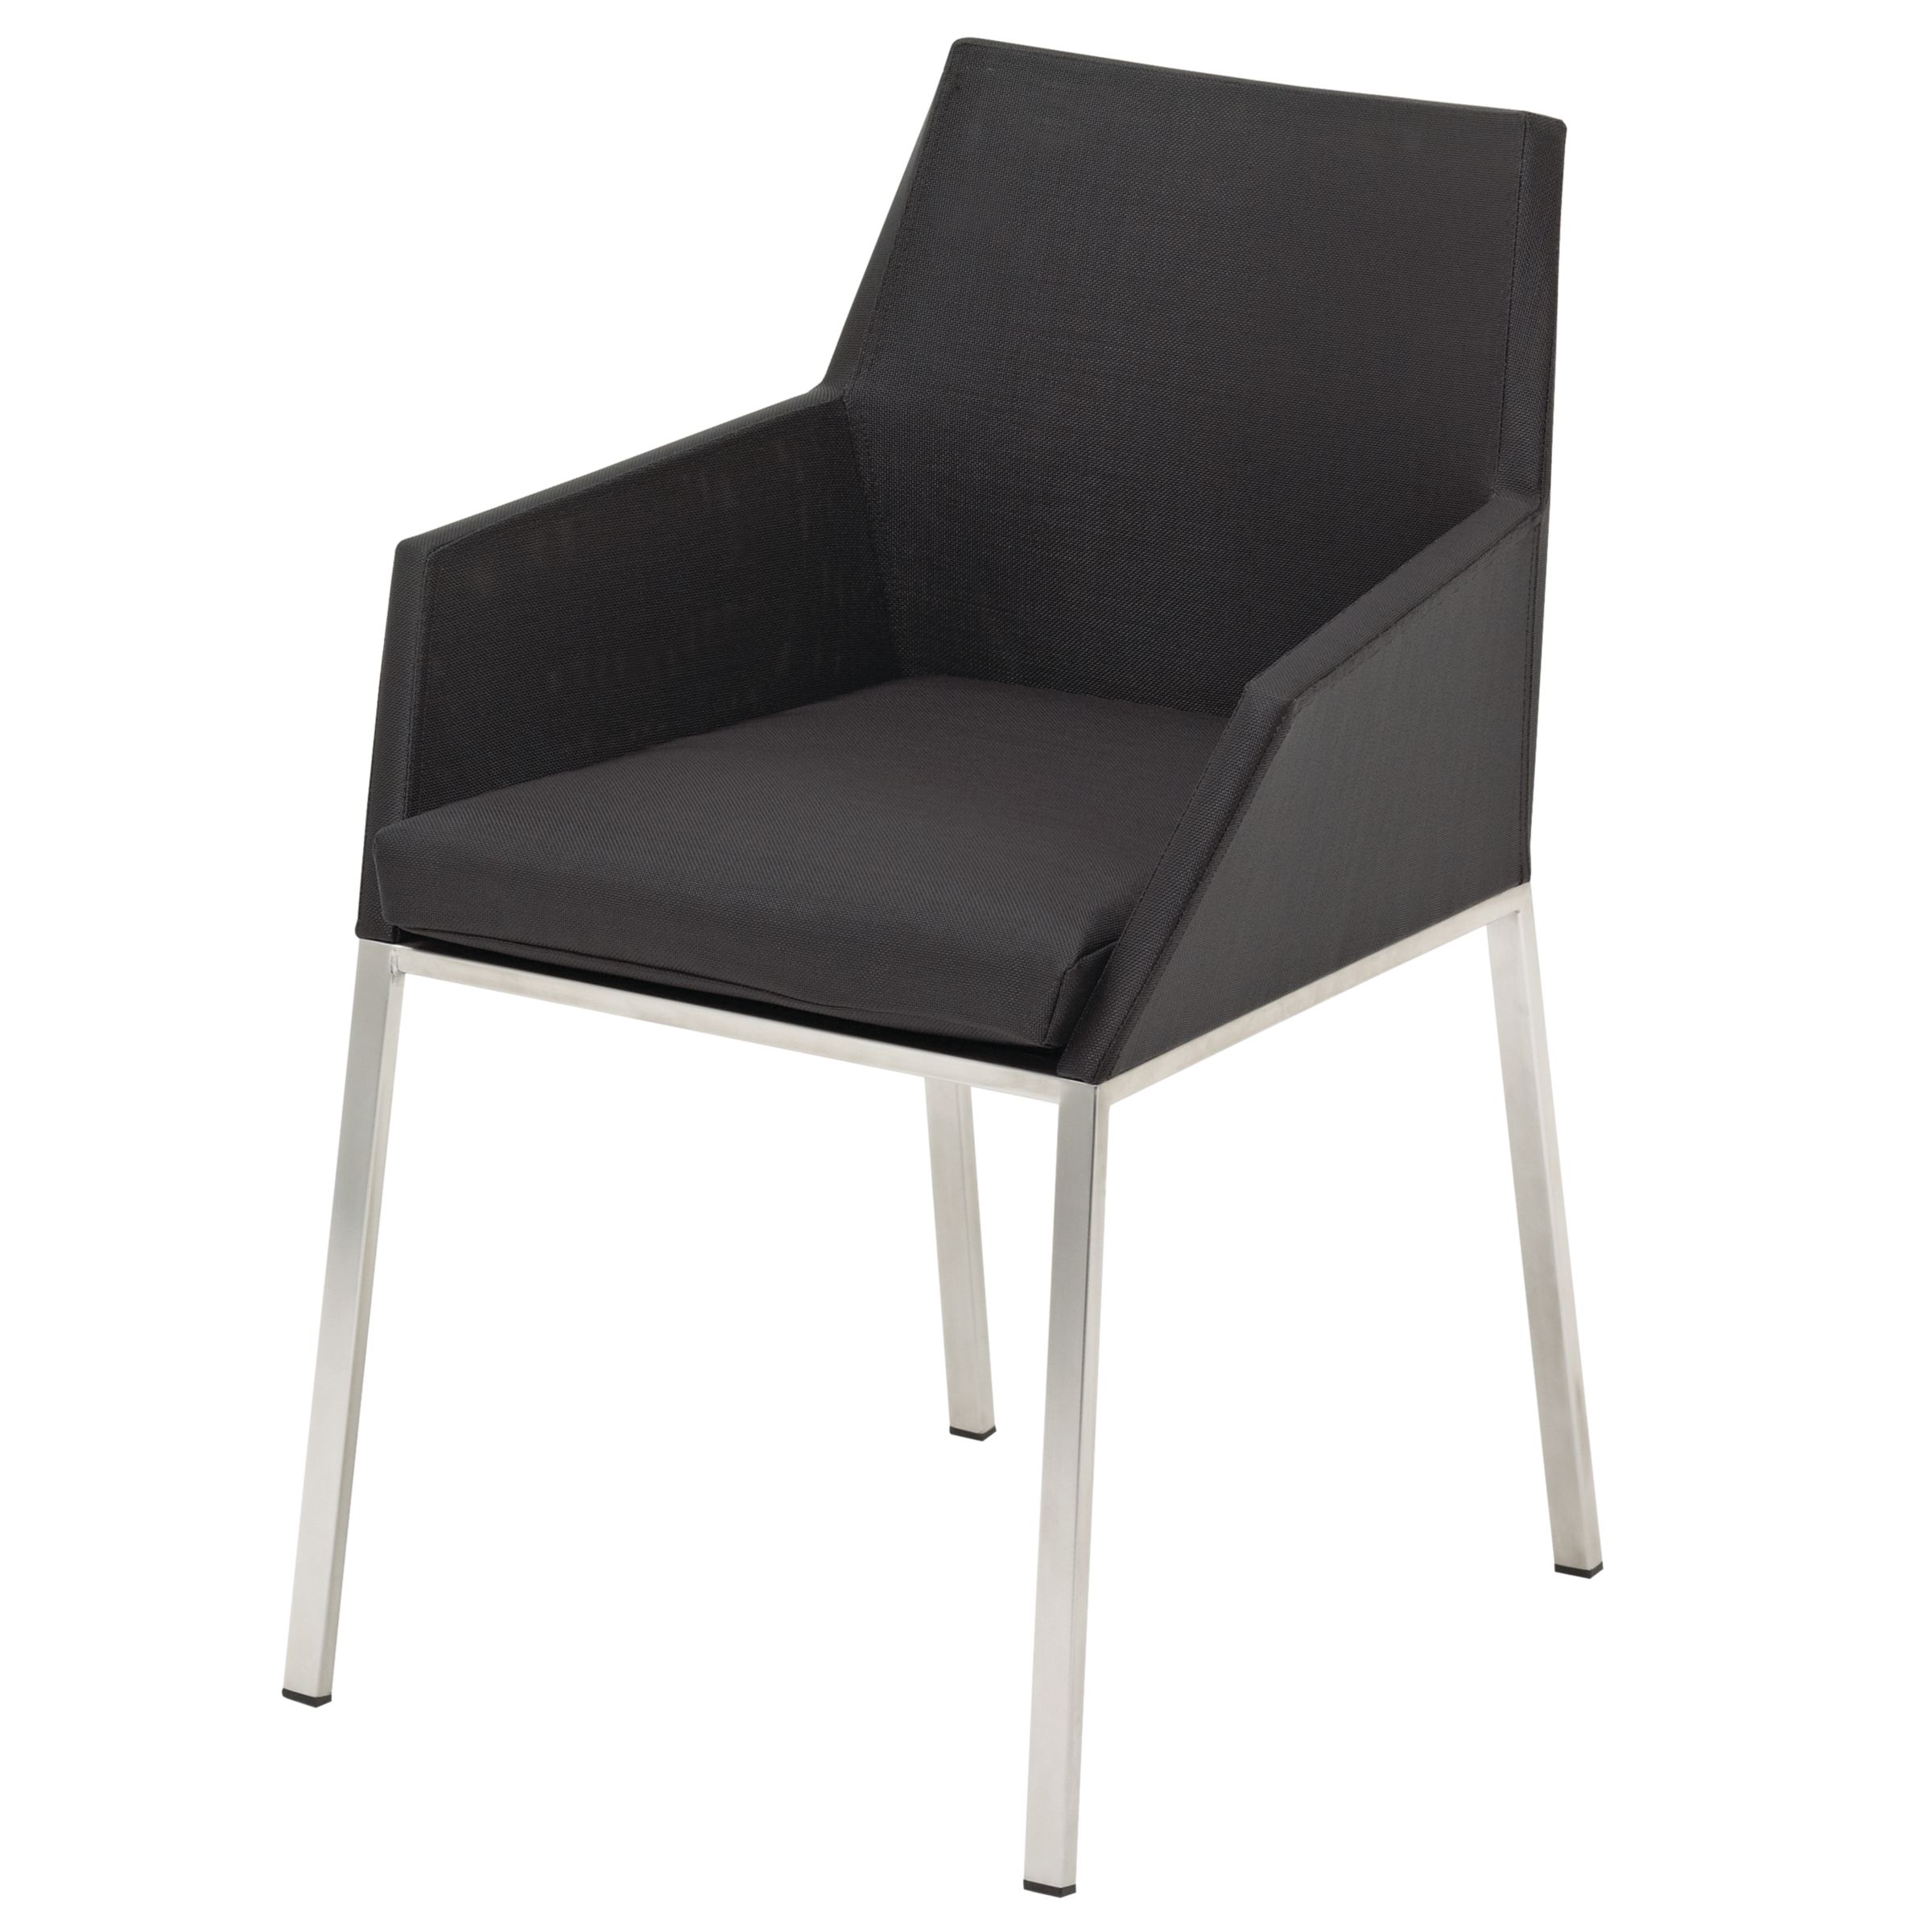 Gloster Cloud Outdoor Dining Chair with Arms, Onyx